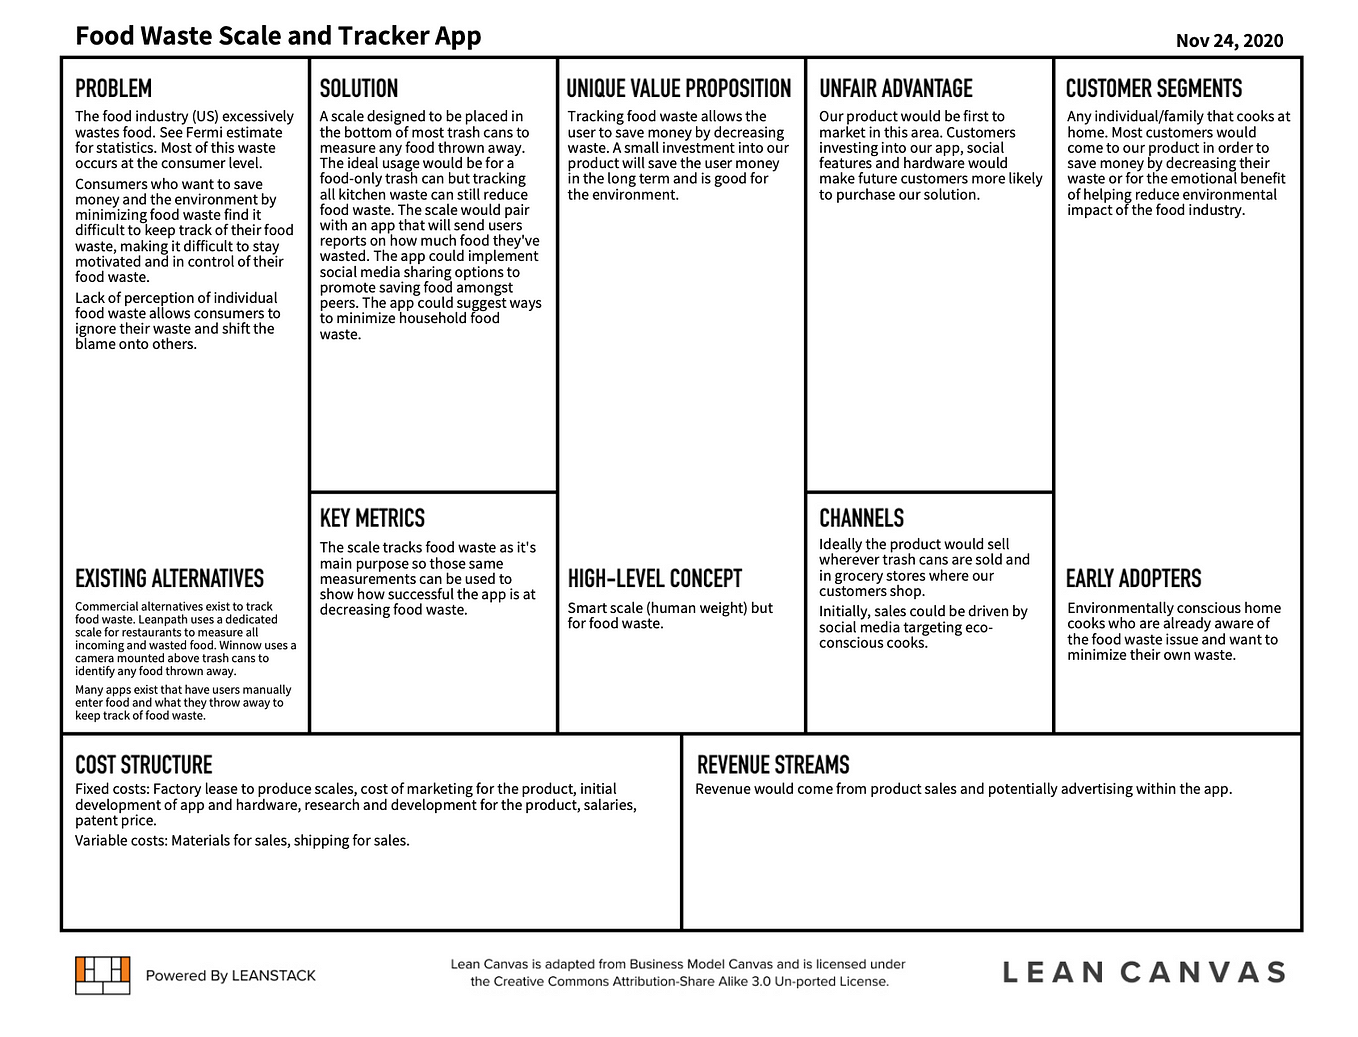 LeanLabs - AI Scale Food Facts